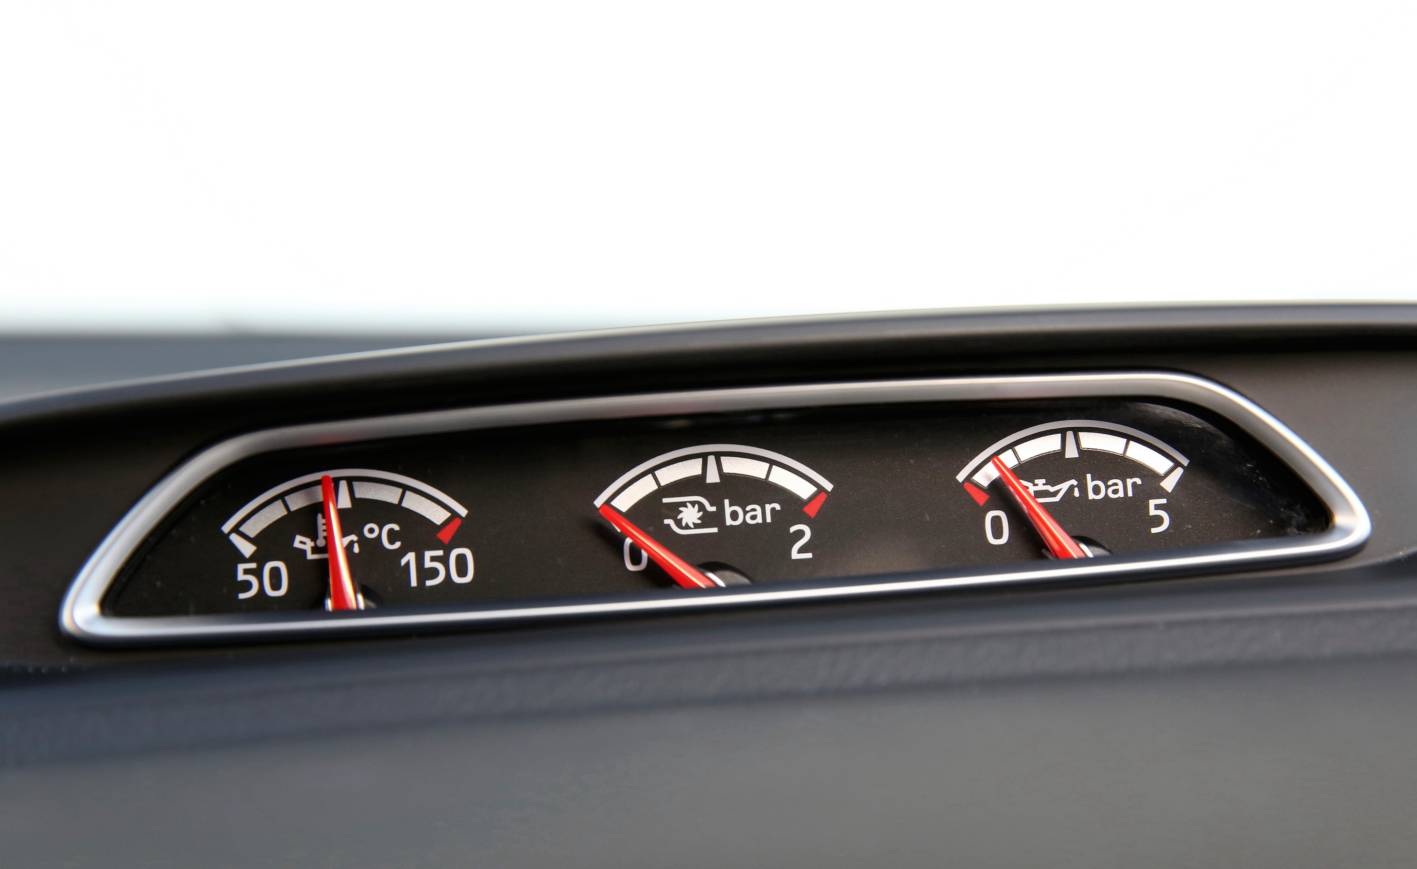 a gauge gauge indicating that the speed will go